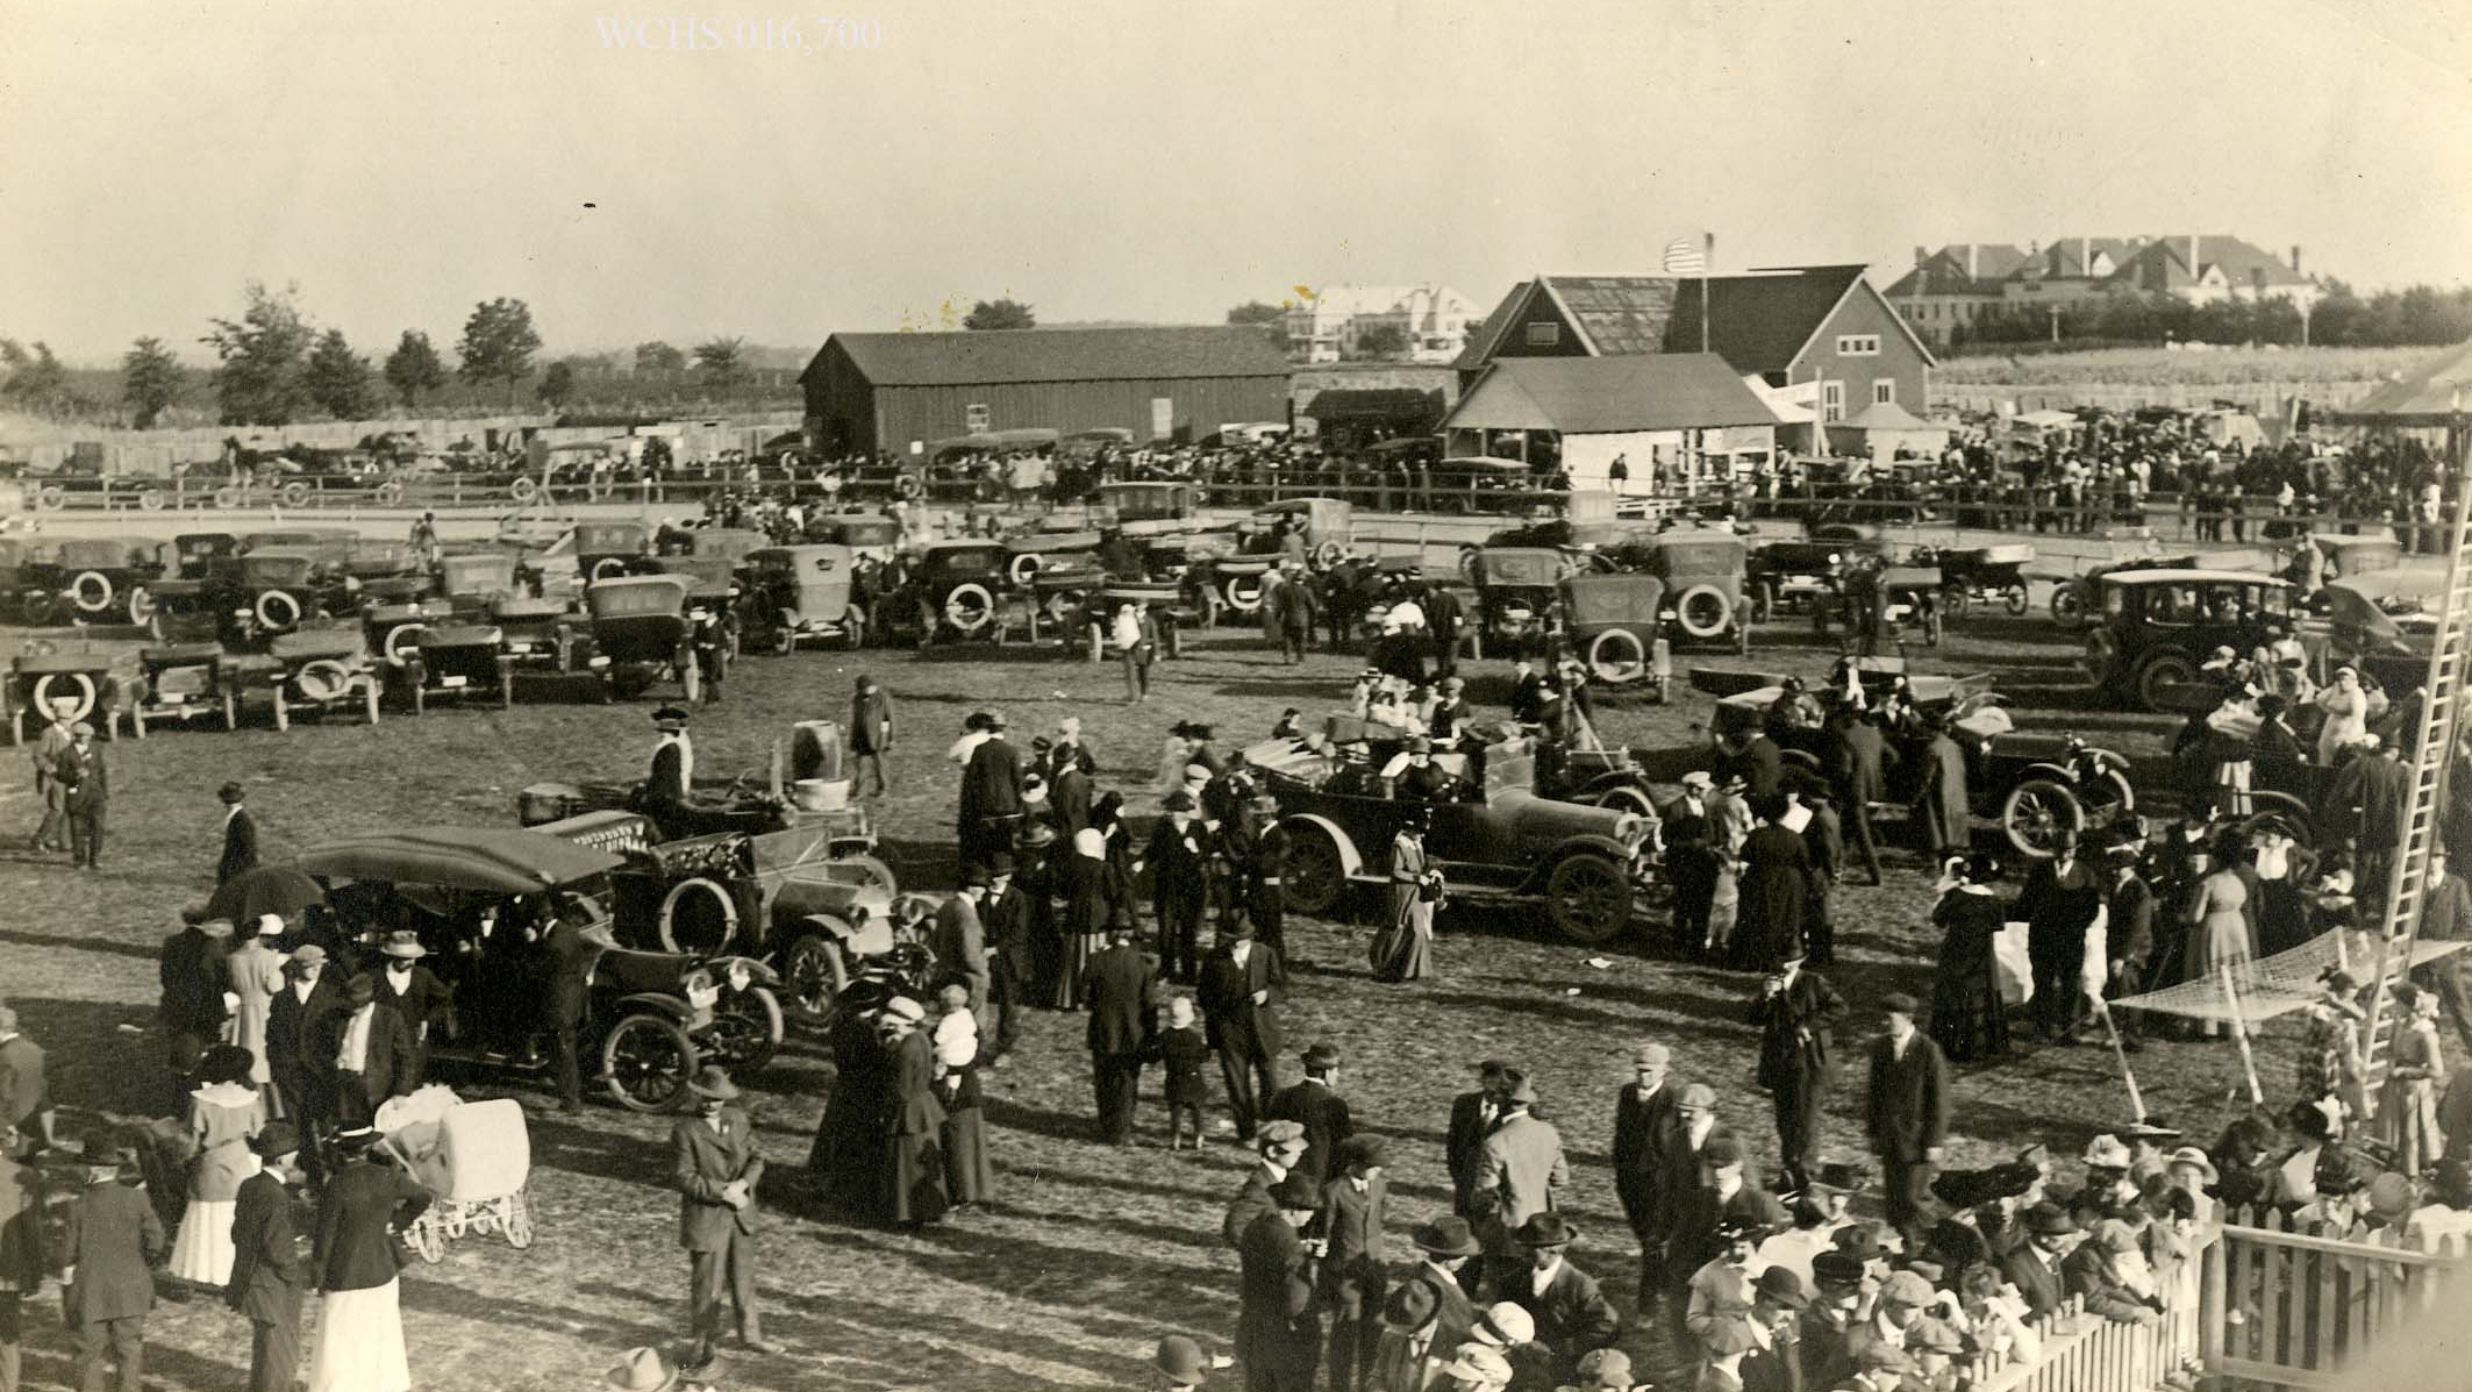 An exhibit at the 1915 County Fair with The Tower Heritage Center home to the Washington County Historical Society in West Bend, Wisconsin